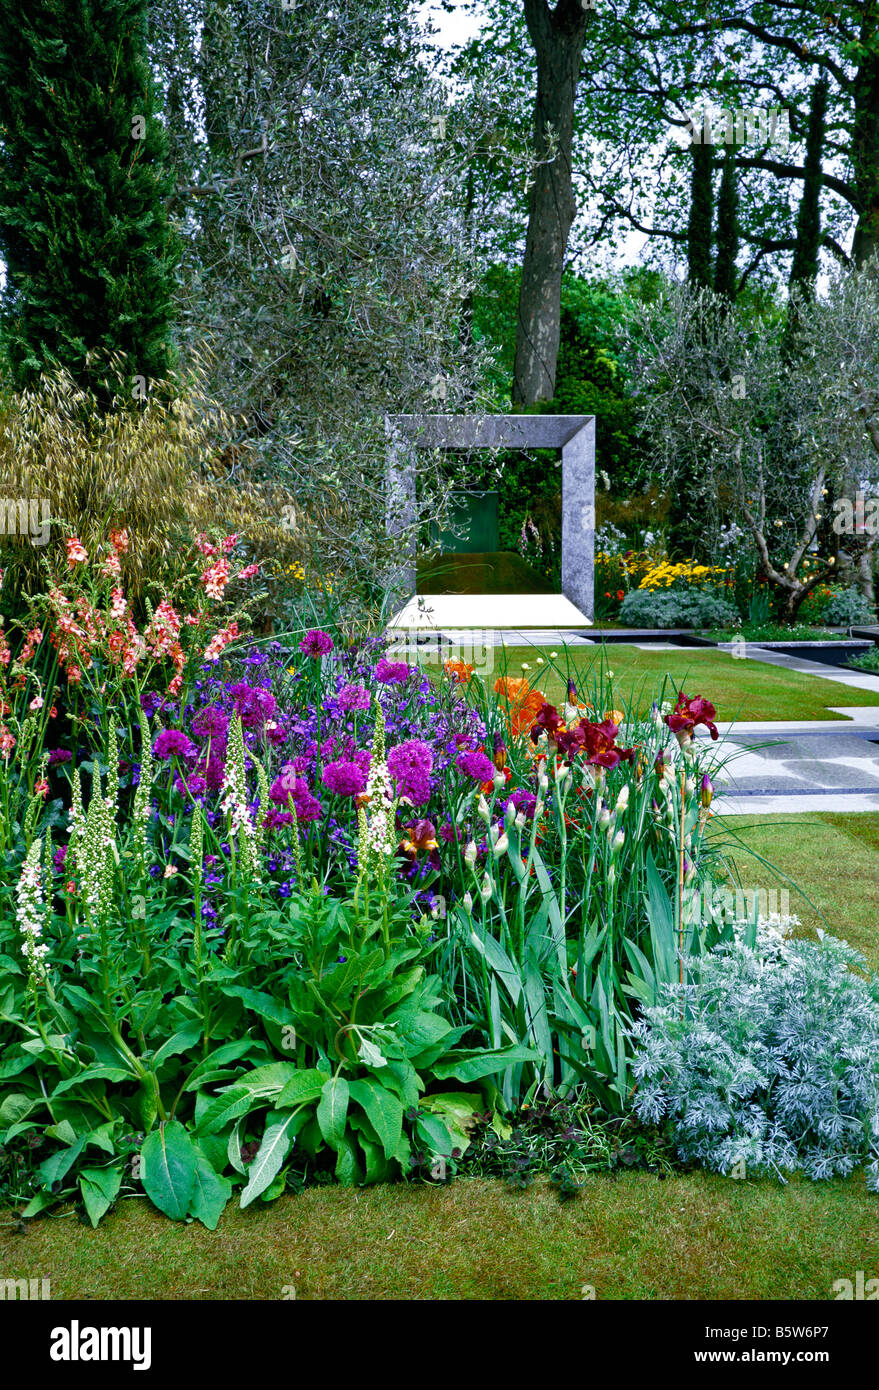 Colourful flowering Chelsea garden with abstract sculpture Stock Photo